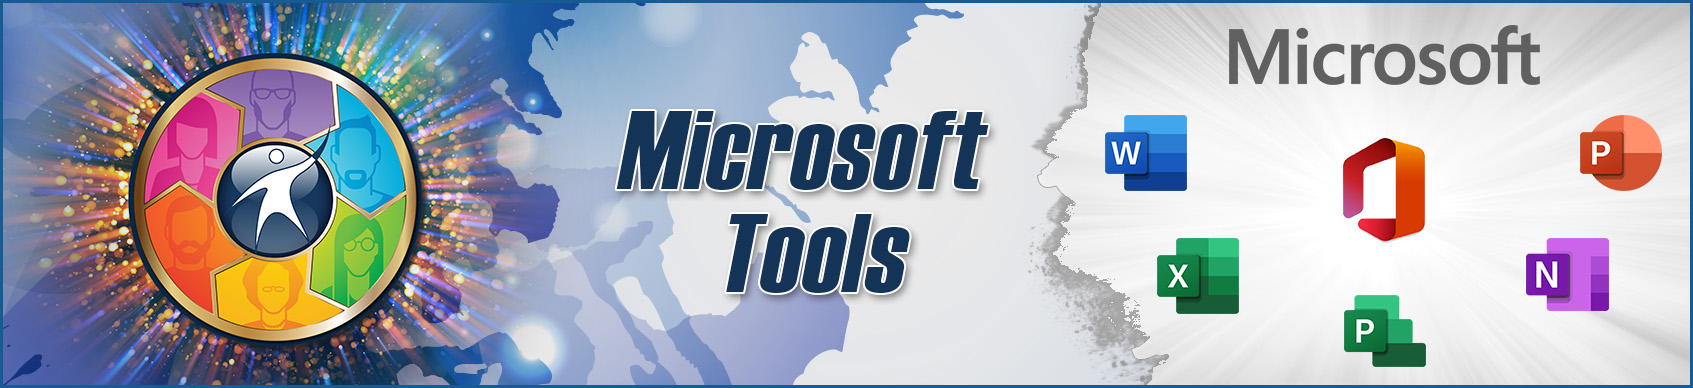 Microsoft Tools video banner - Graphic composite with OTAN logo and Microsoft Office logos.